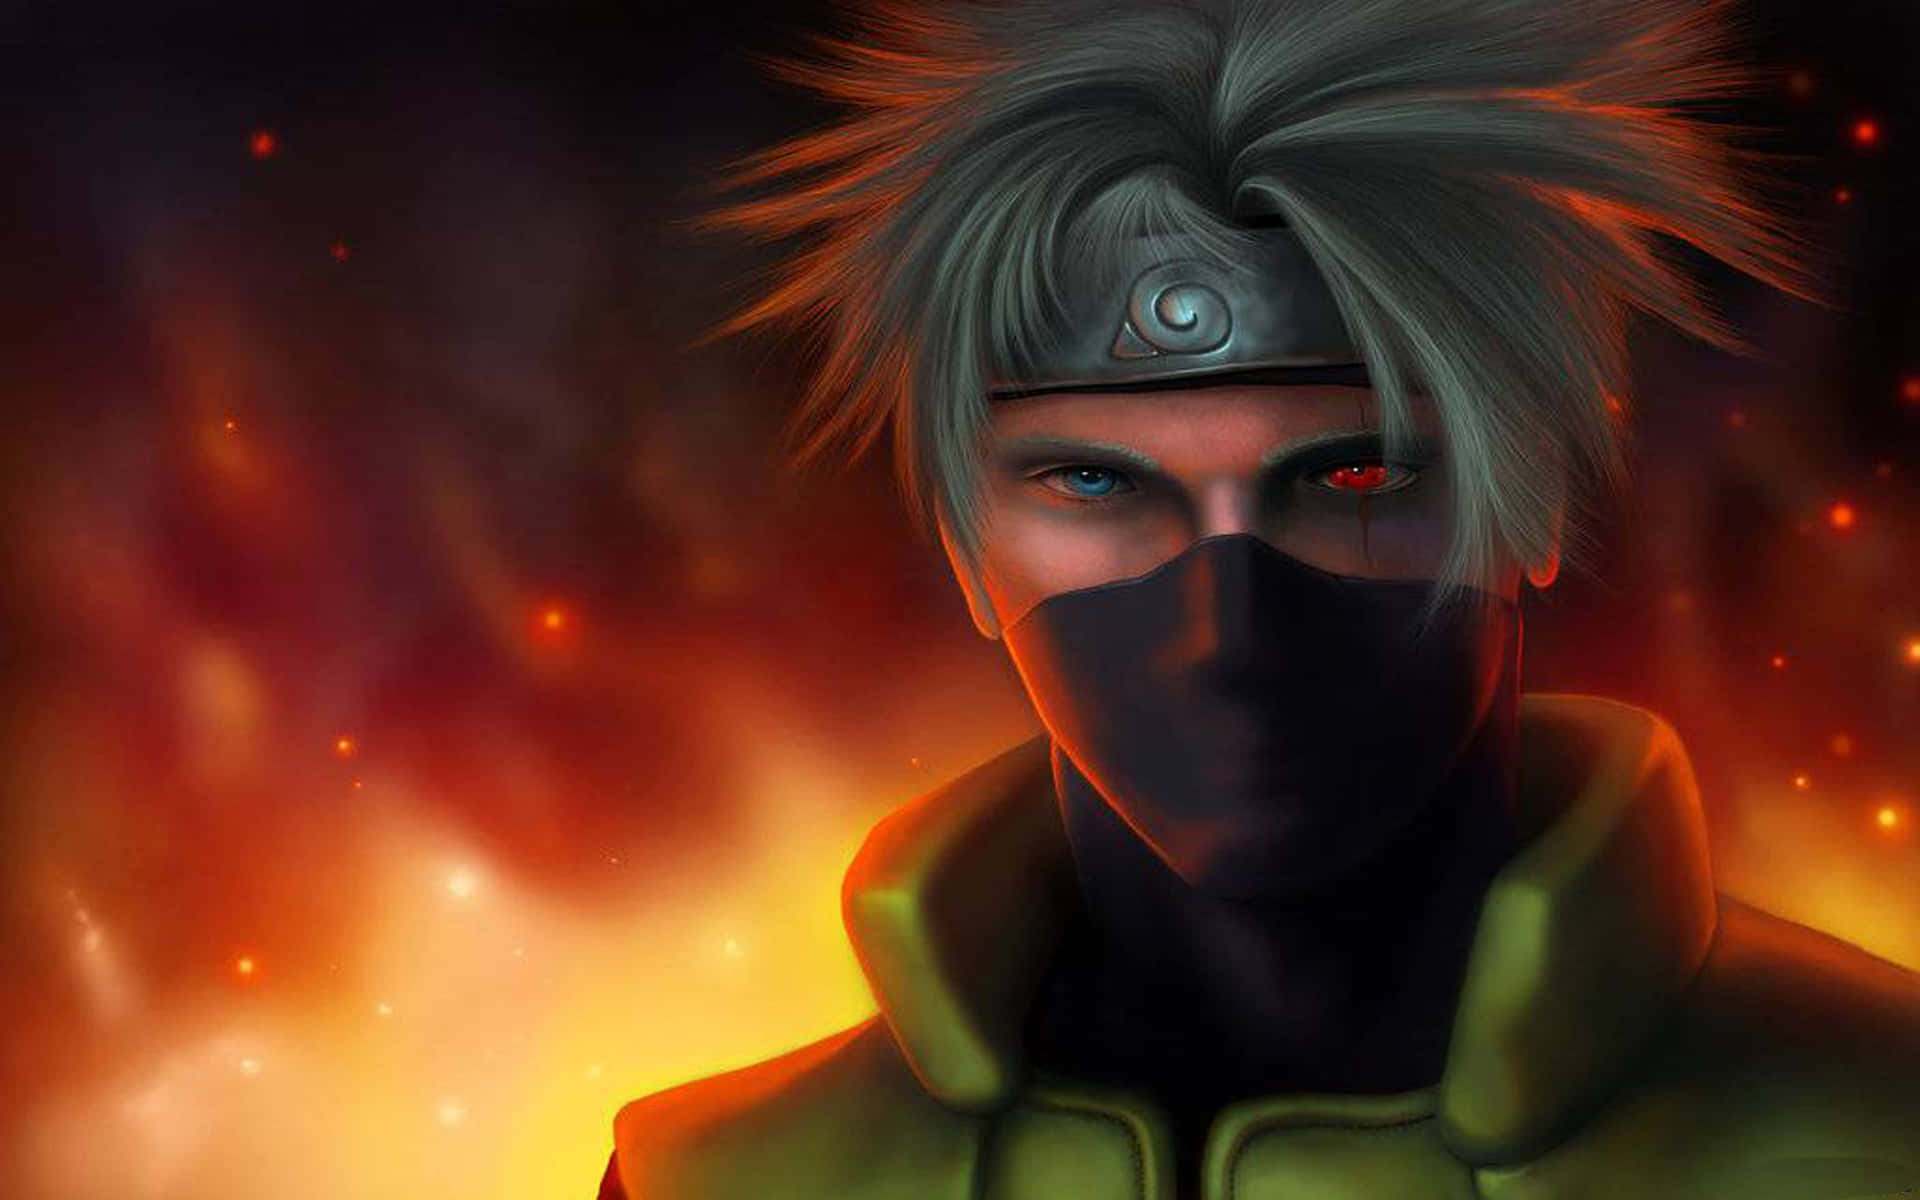 Unleash your inner power with Naruto Fire. Wallpaper